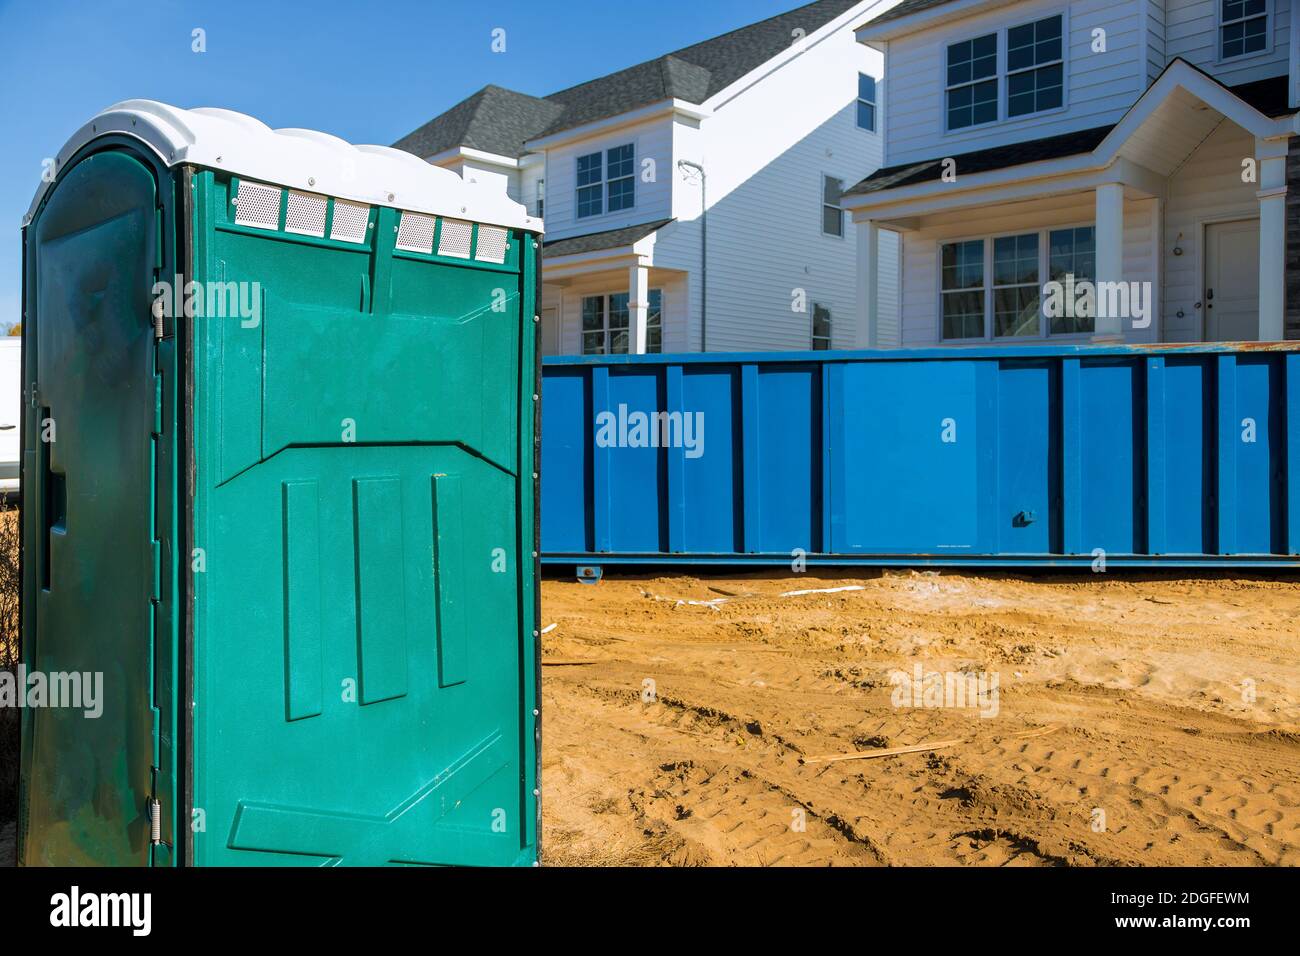 Portable bio toilet cabins at the construction removal of debris construction waste building demolition with rock and concrete r Stock Photo